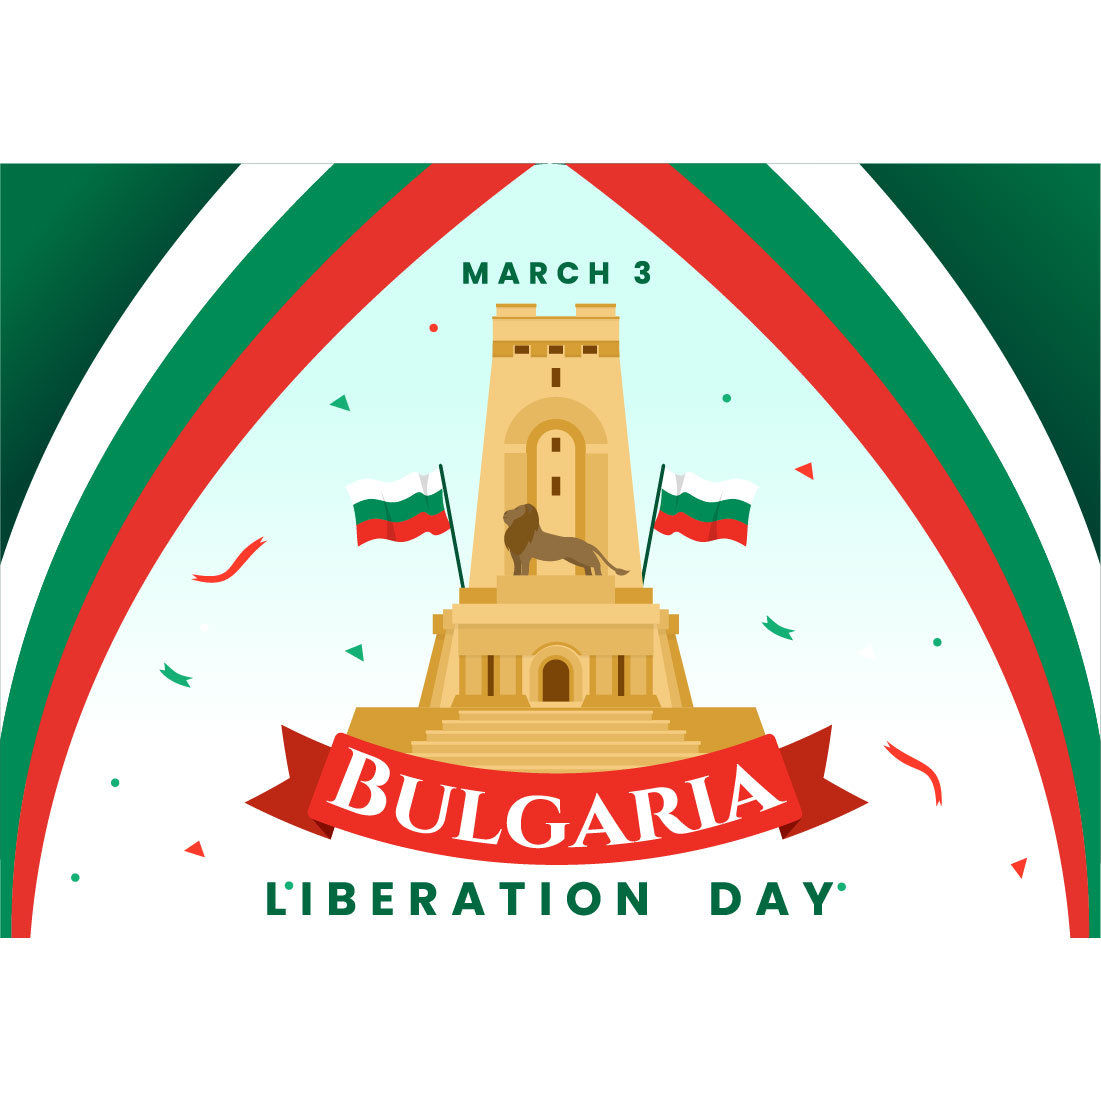 13 Bulgaria Liberation Day Illustration preview image.